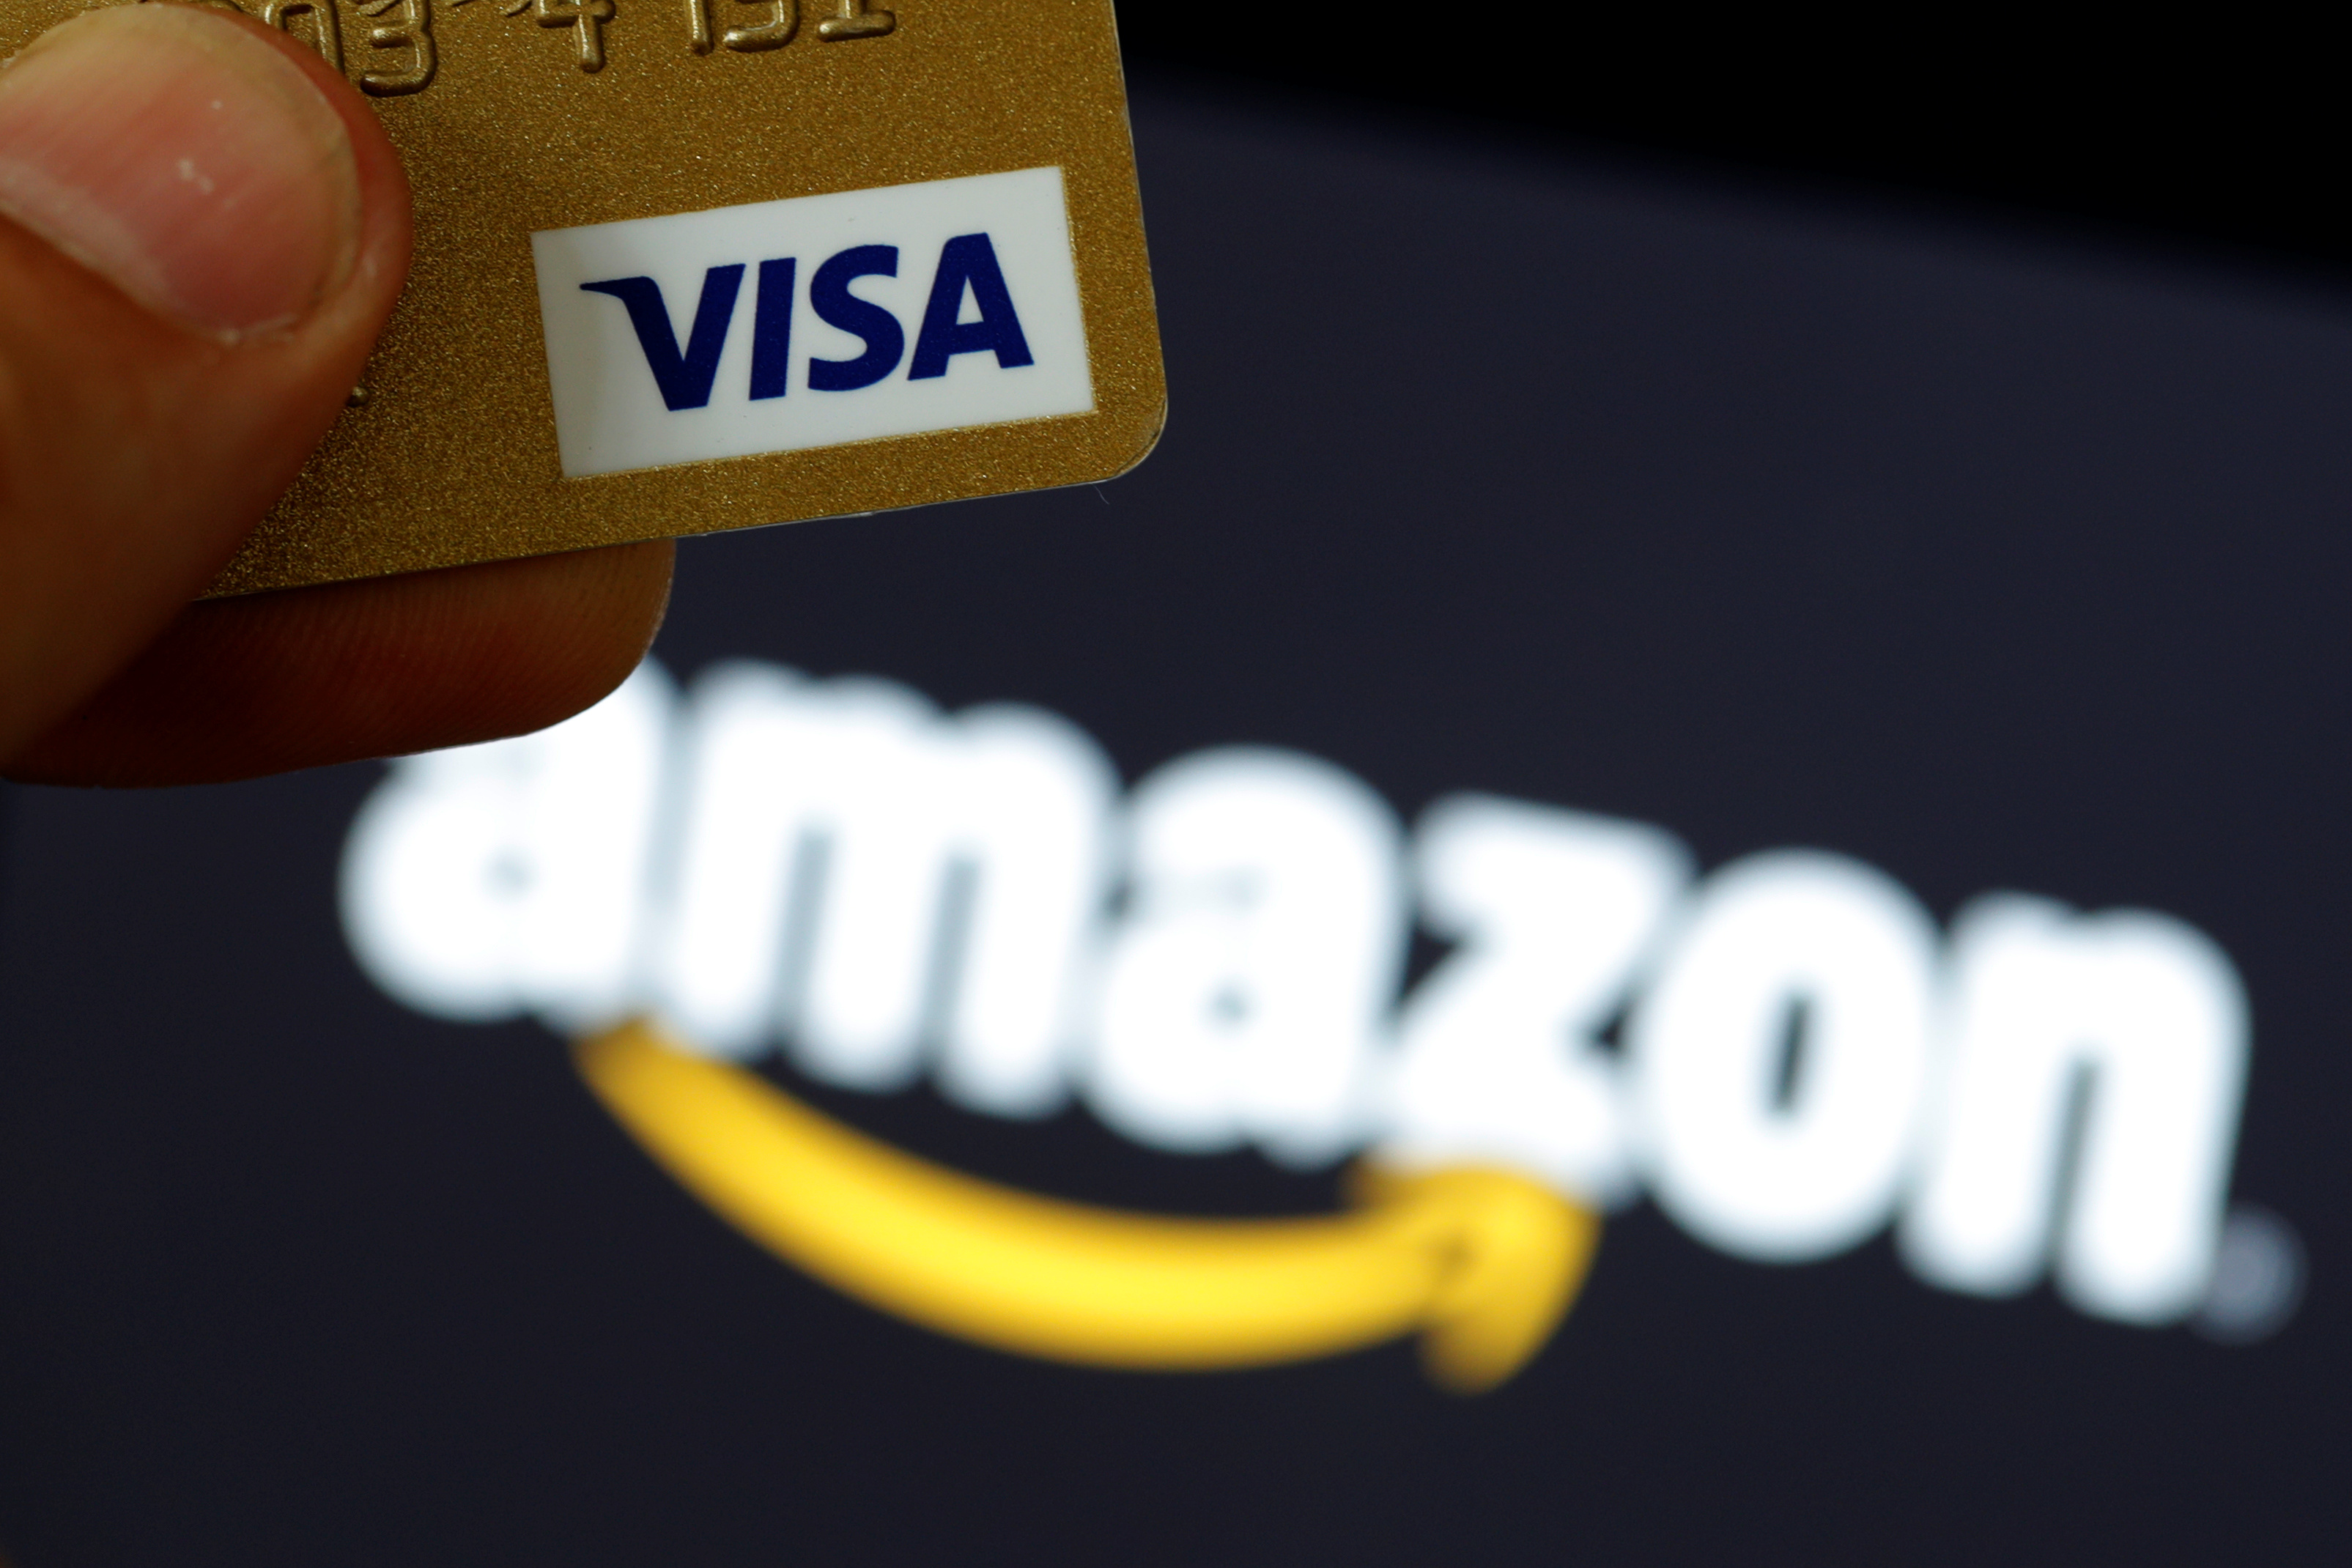 A visa credit card is held in front of an Amazon logo in this picture illustration taken September 6, 2017. REUTERS/Philippe Wojazer/Illustration